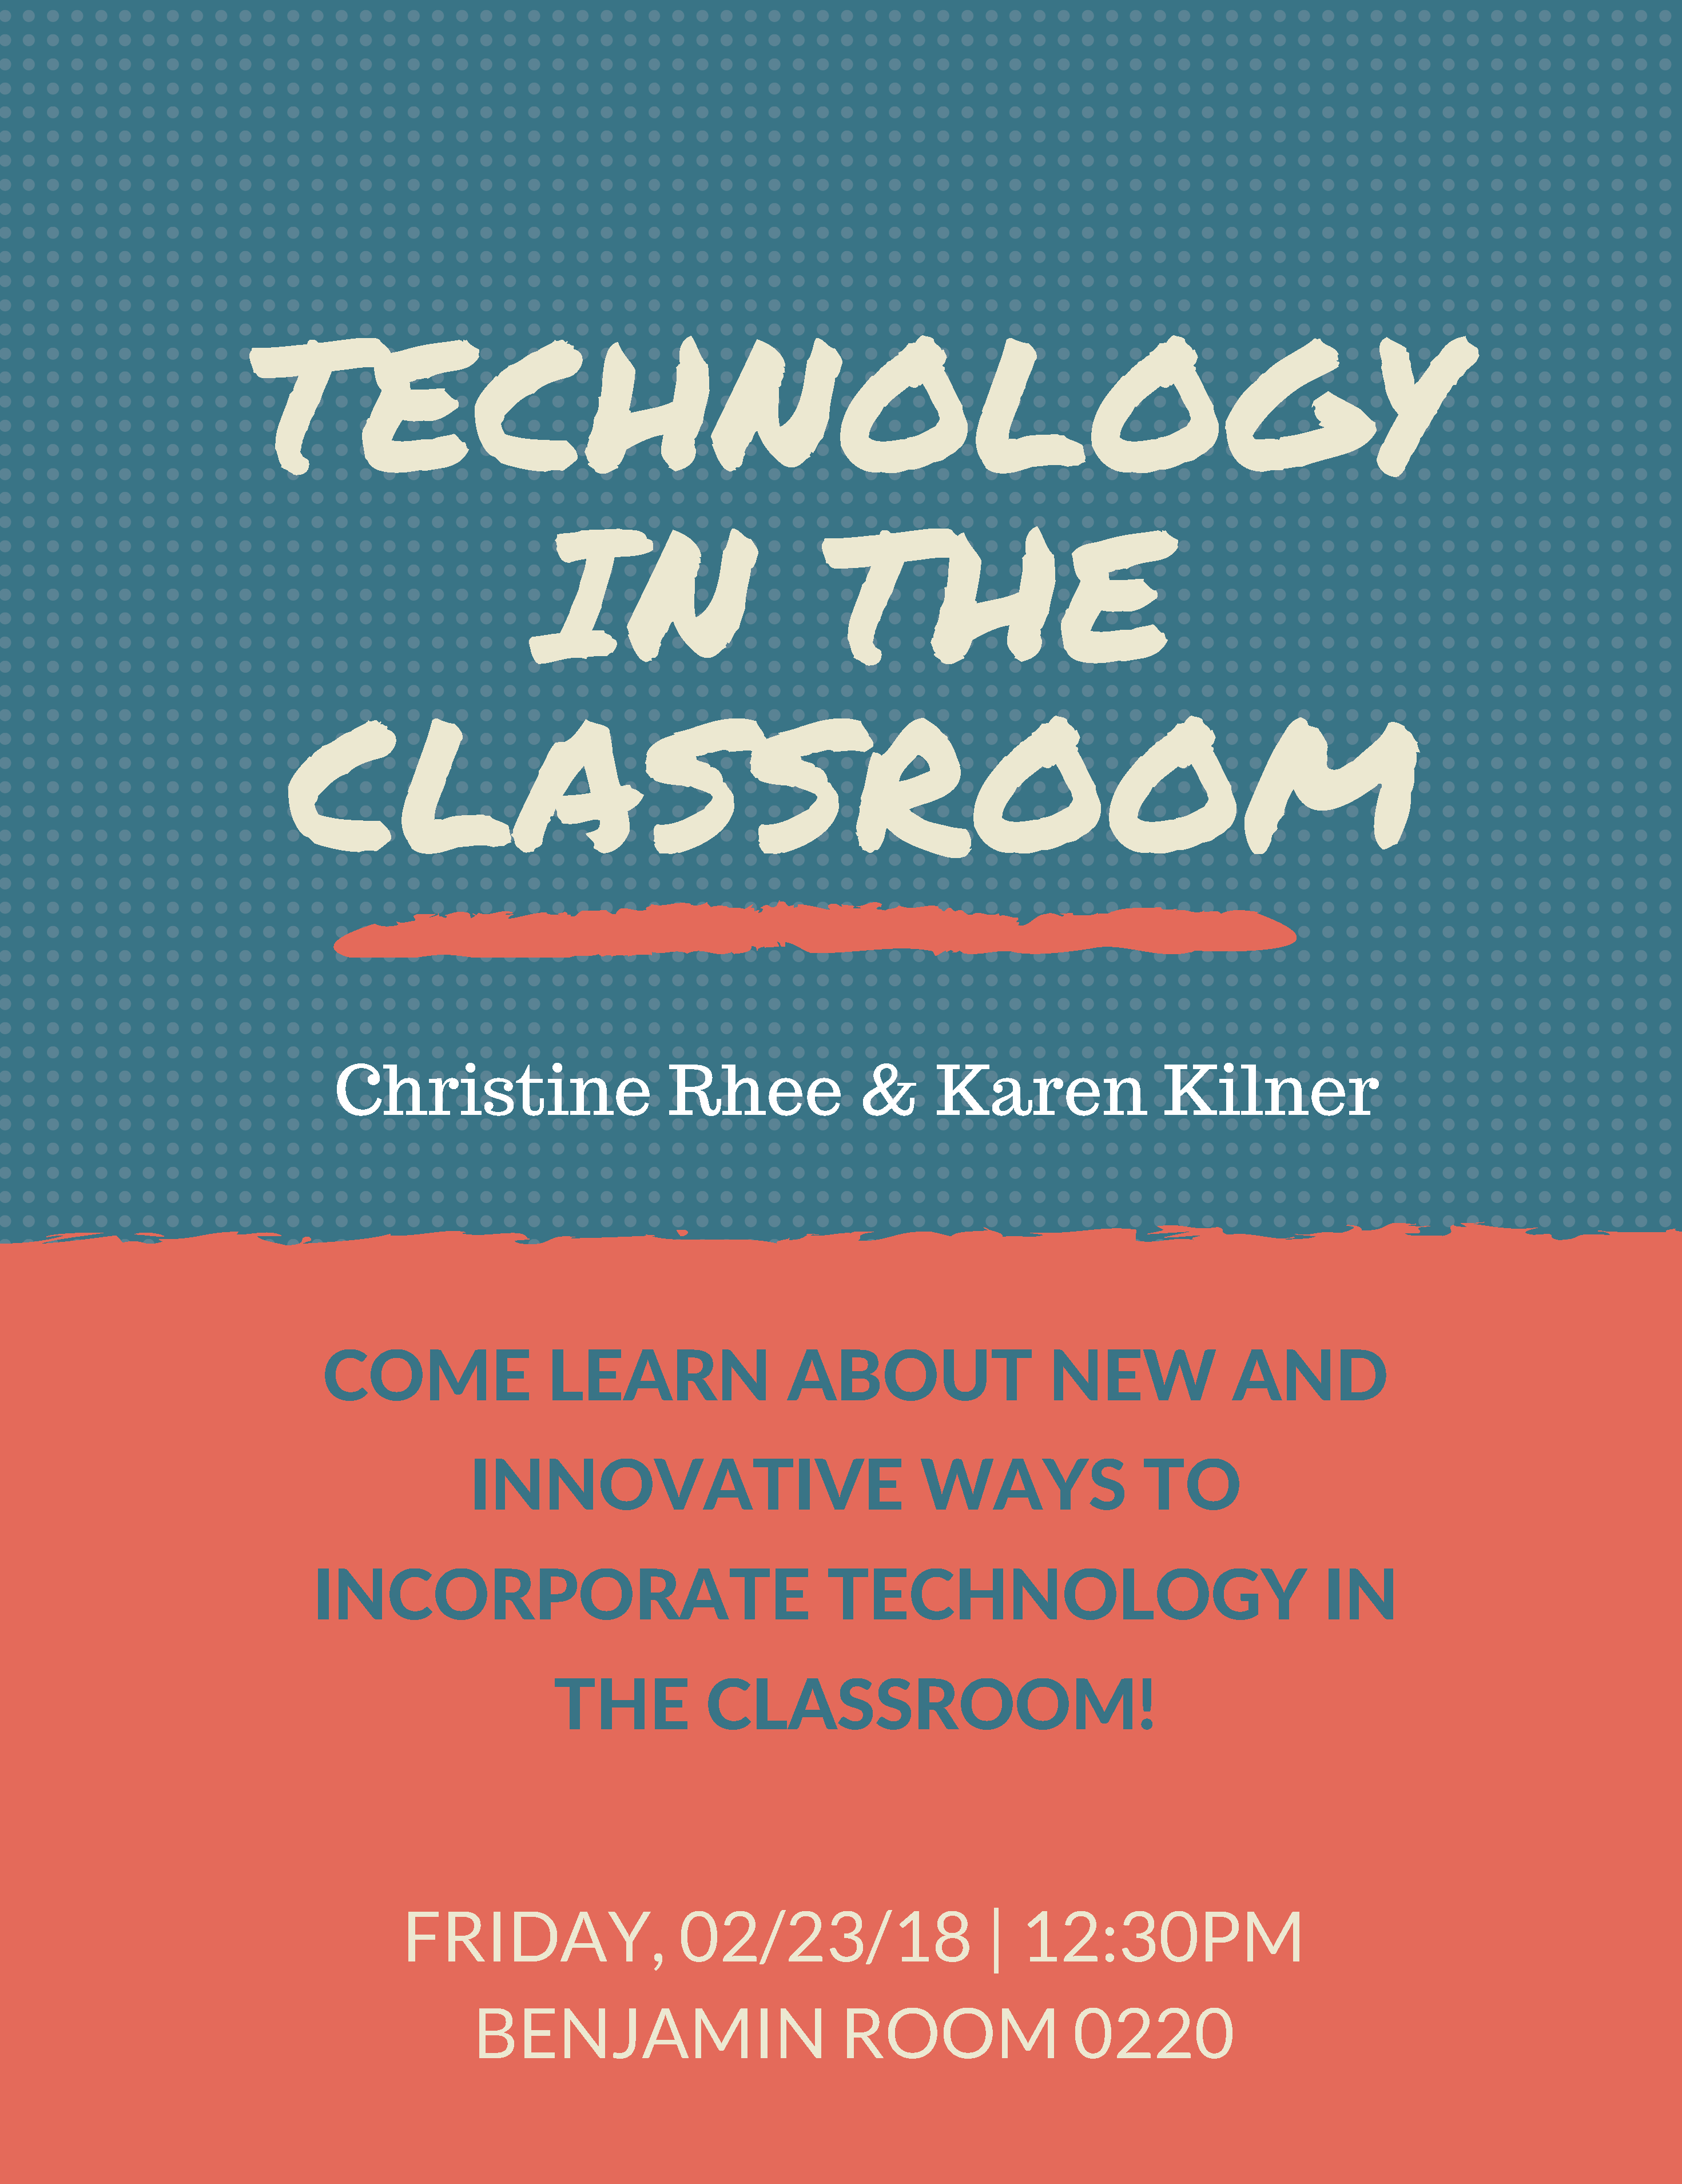 Technology in the Classroom 